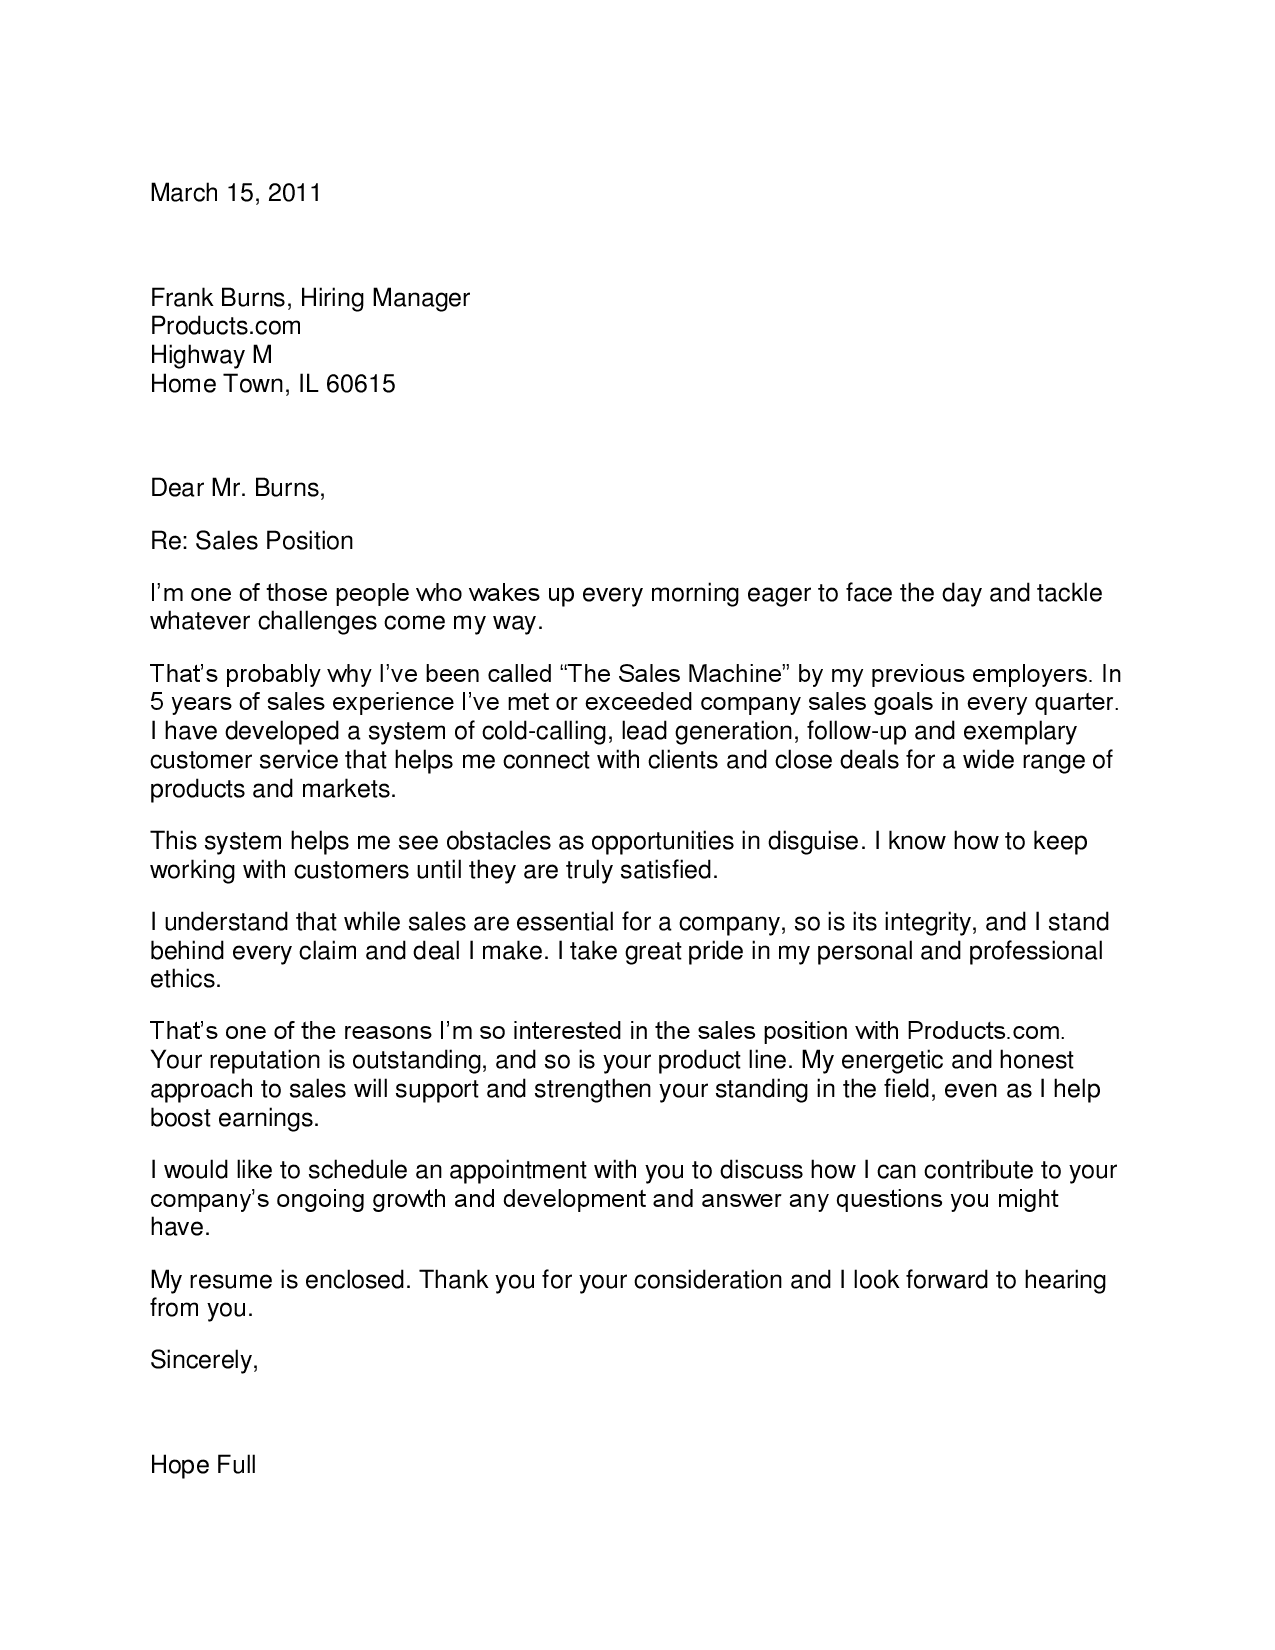 Charity worker cover letter